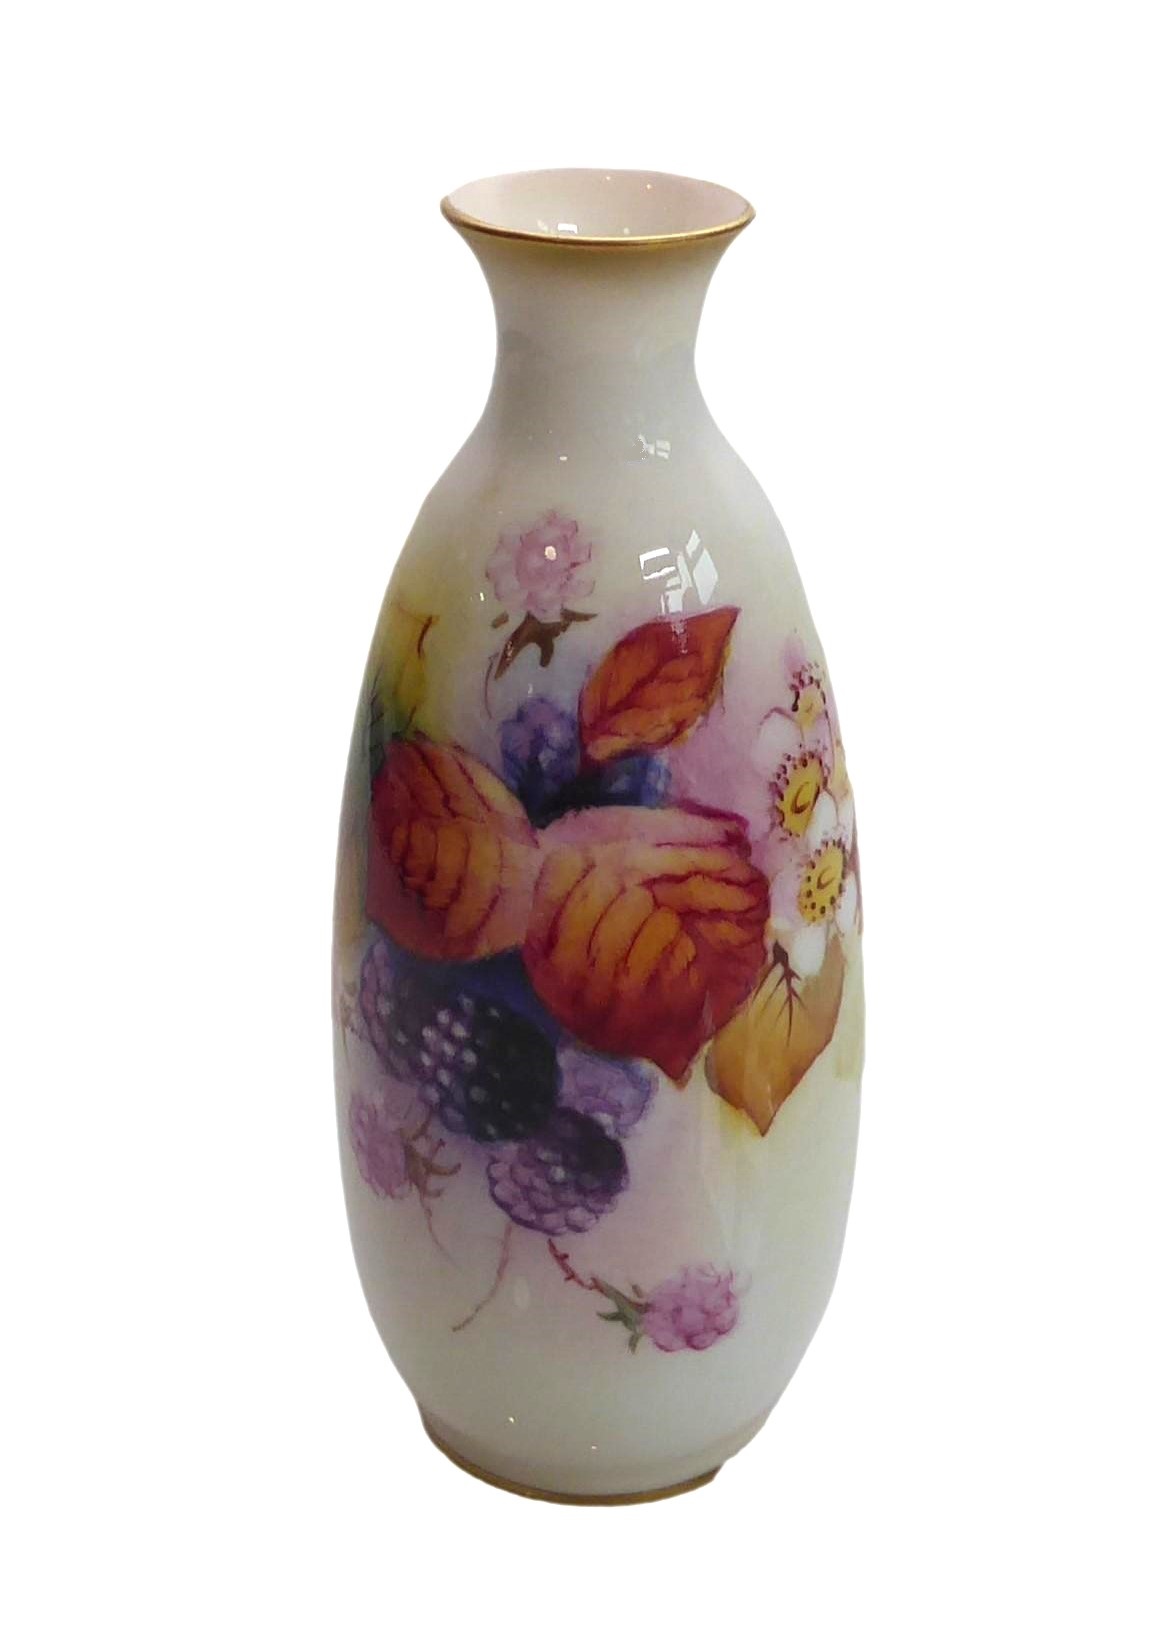 A Royal Worcester porcelain vase hand painted with blackberries and signed M Miller, date code